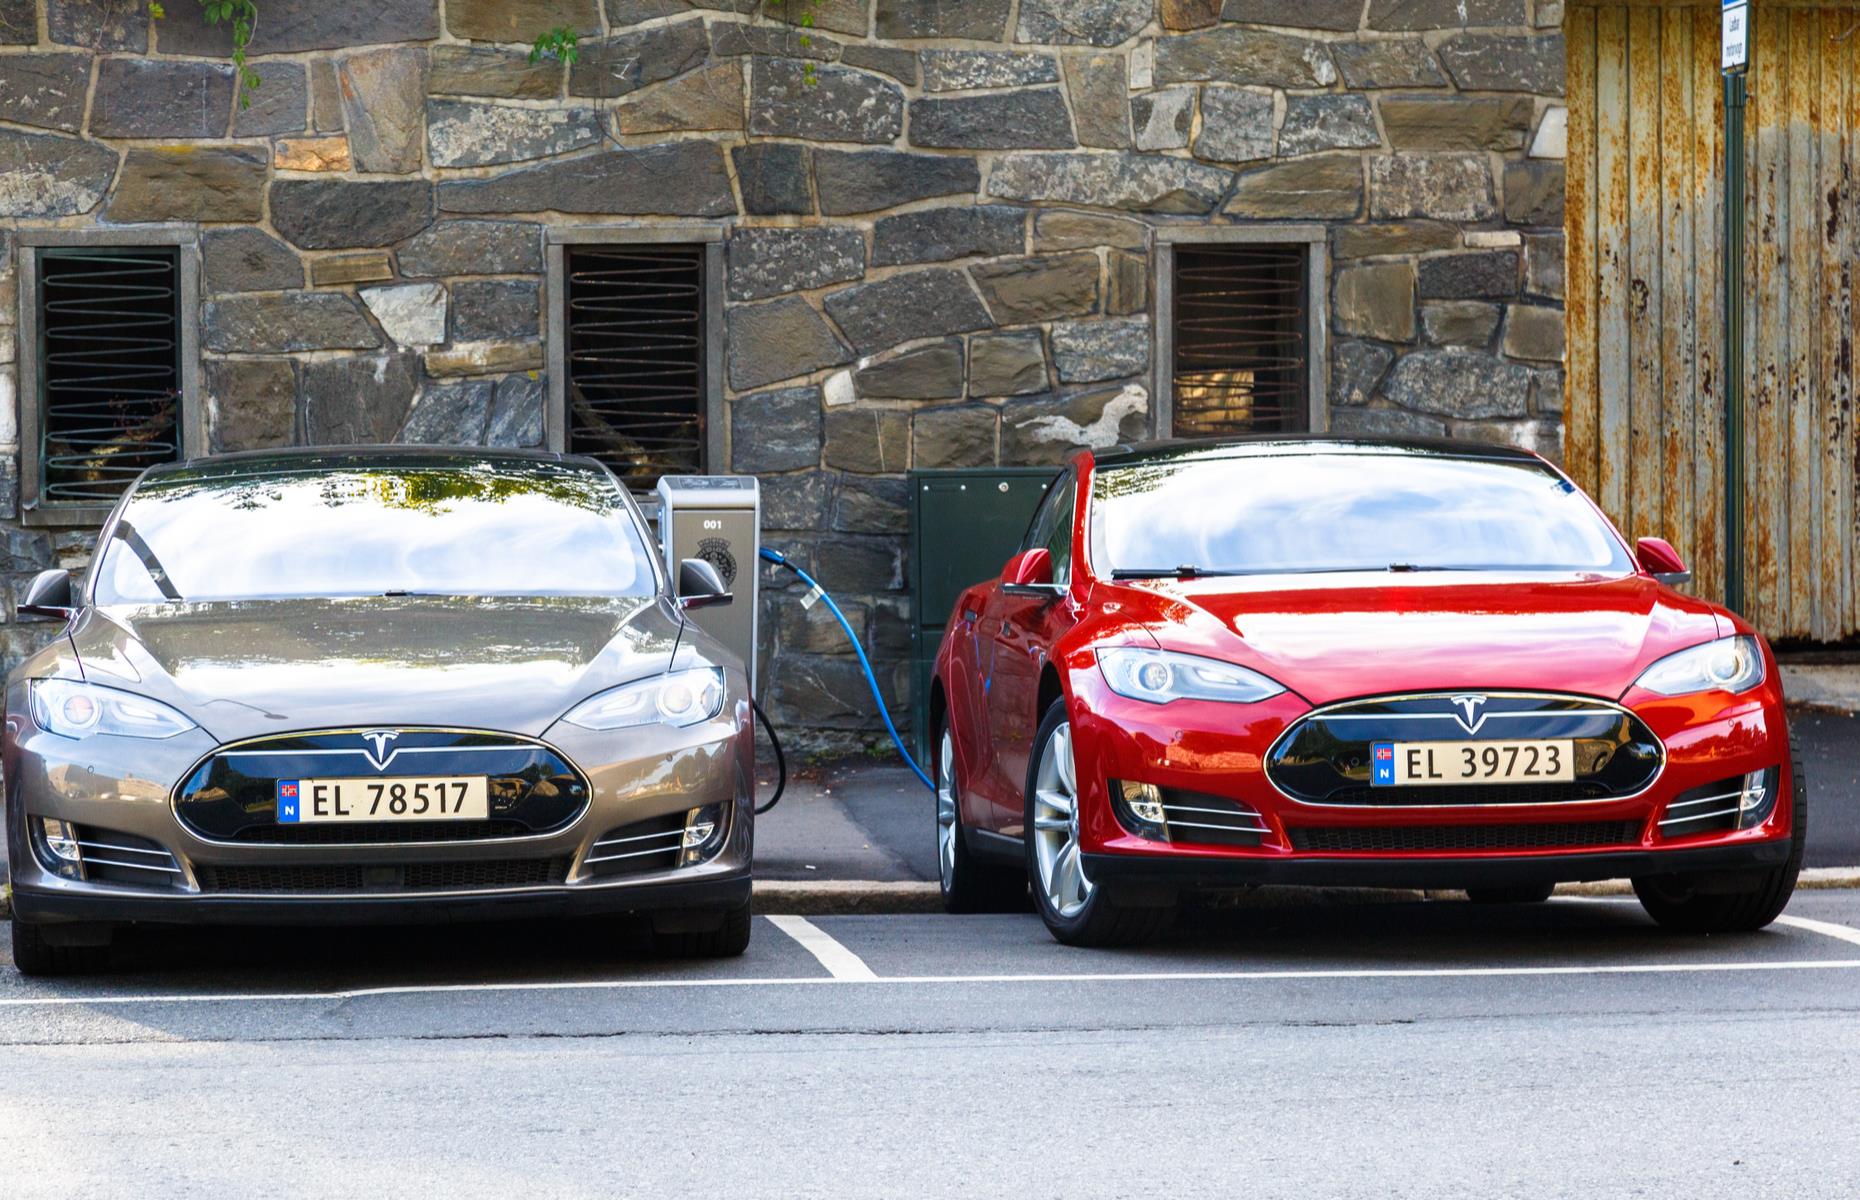 Norway’s love of electric cars